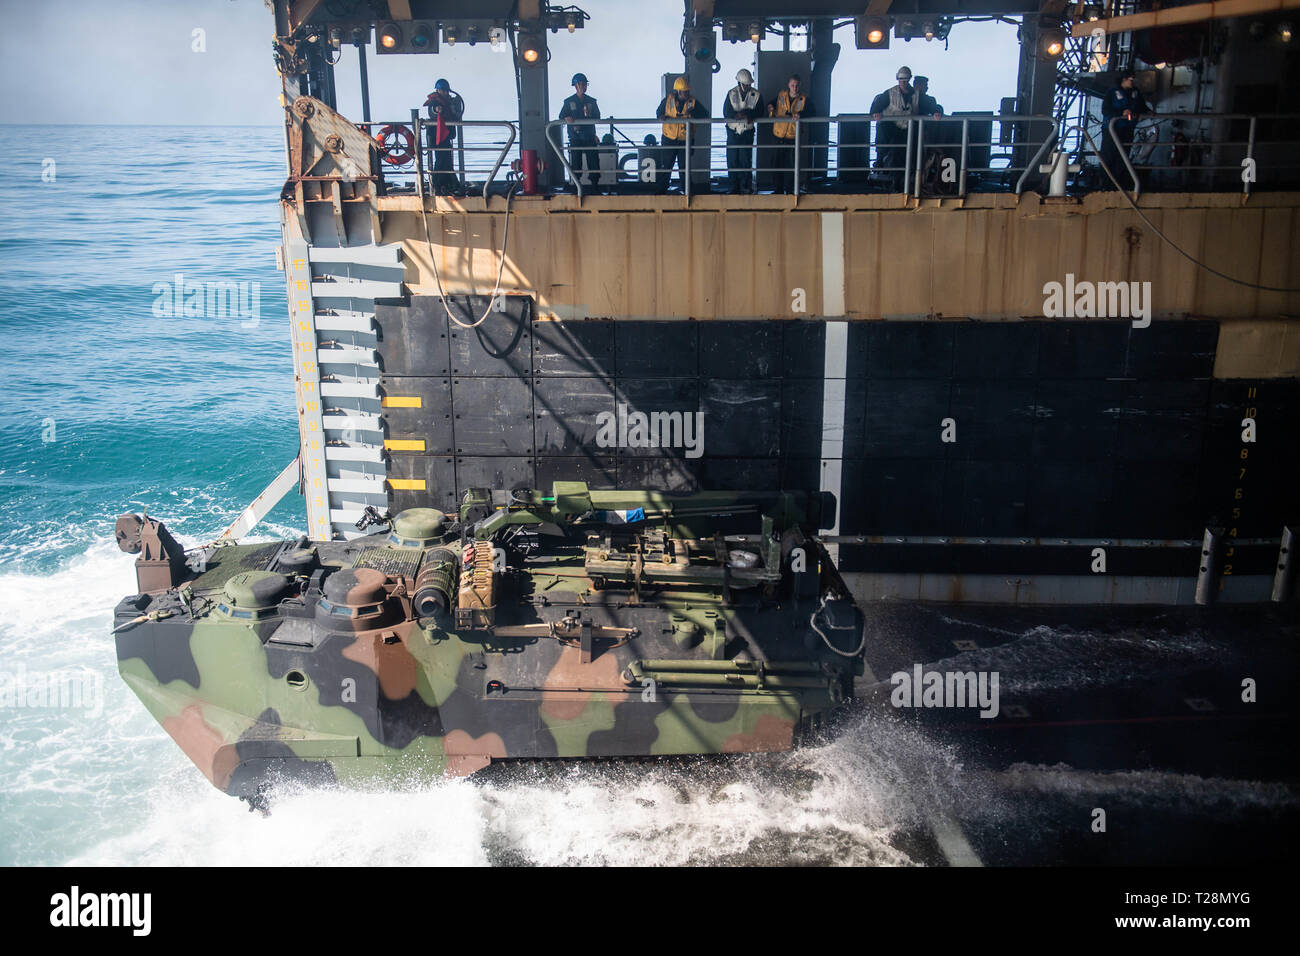 190329-N-HD110-0100  PACIFIC OCEAN (March 29, 2019) An assault amphibious vehicle attached to Battalion Landing Team 3rd Battalion, 5th Marine Regiment, 11th Marine Expeditionary Unit exits the well deck of the Harpers Ferry-class amphibious dock landing ship USS Harpers Ferry (LSD 49). Harpers Ferry is underway conducting routine operations as a part of USS Boxer Amphibious Ready Group (ARG) in the eastern Pacific Ocean. (U.S. Navy photo by Mass Communication Specialist 3rd Class Danielle A. Baker) Stock Photo